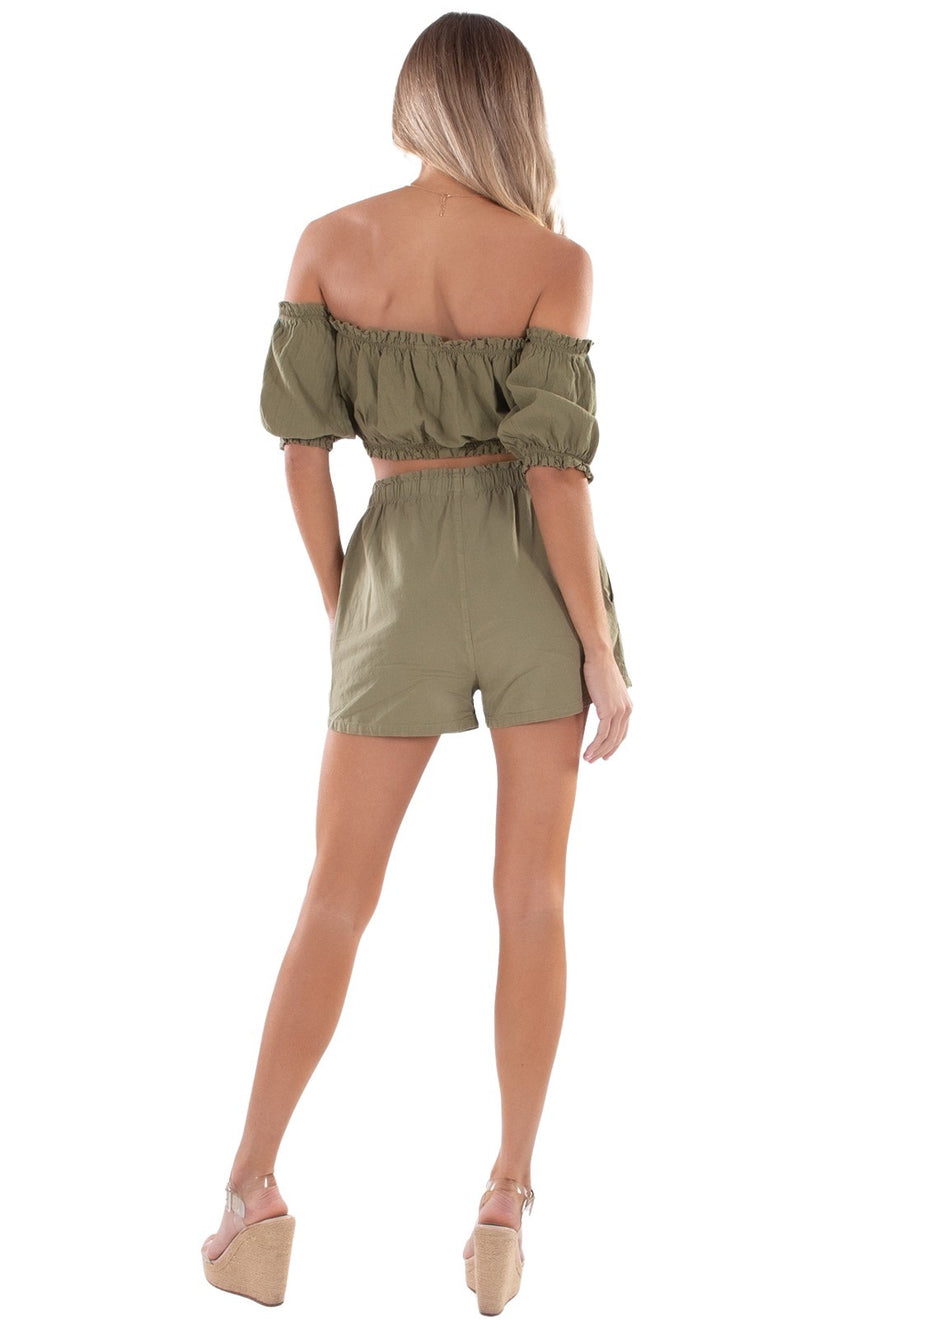 NW1657- Olive Green Cotton Top